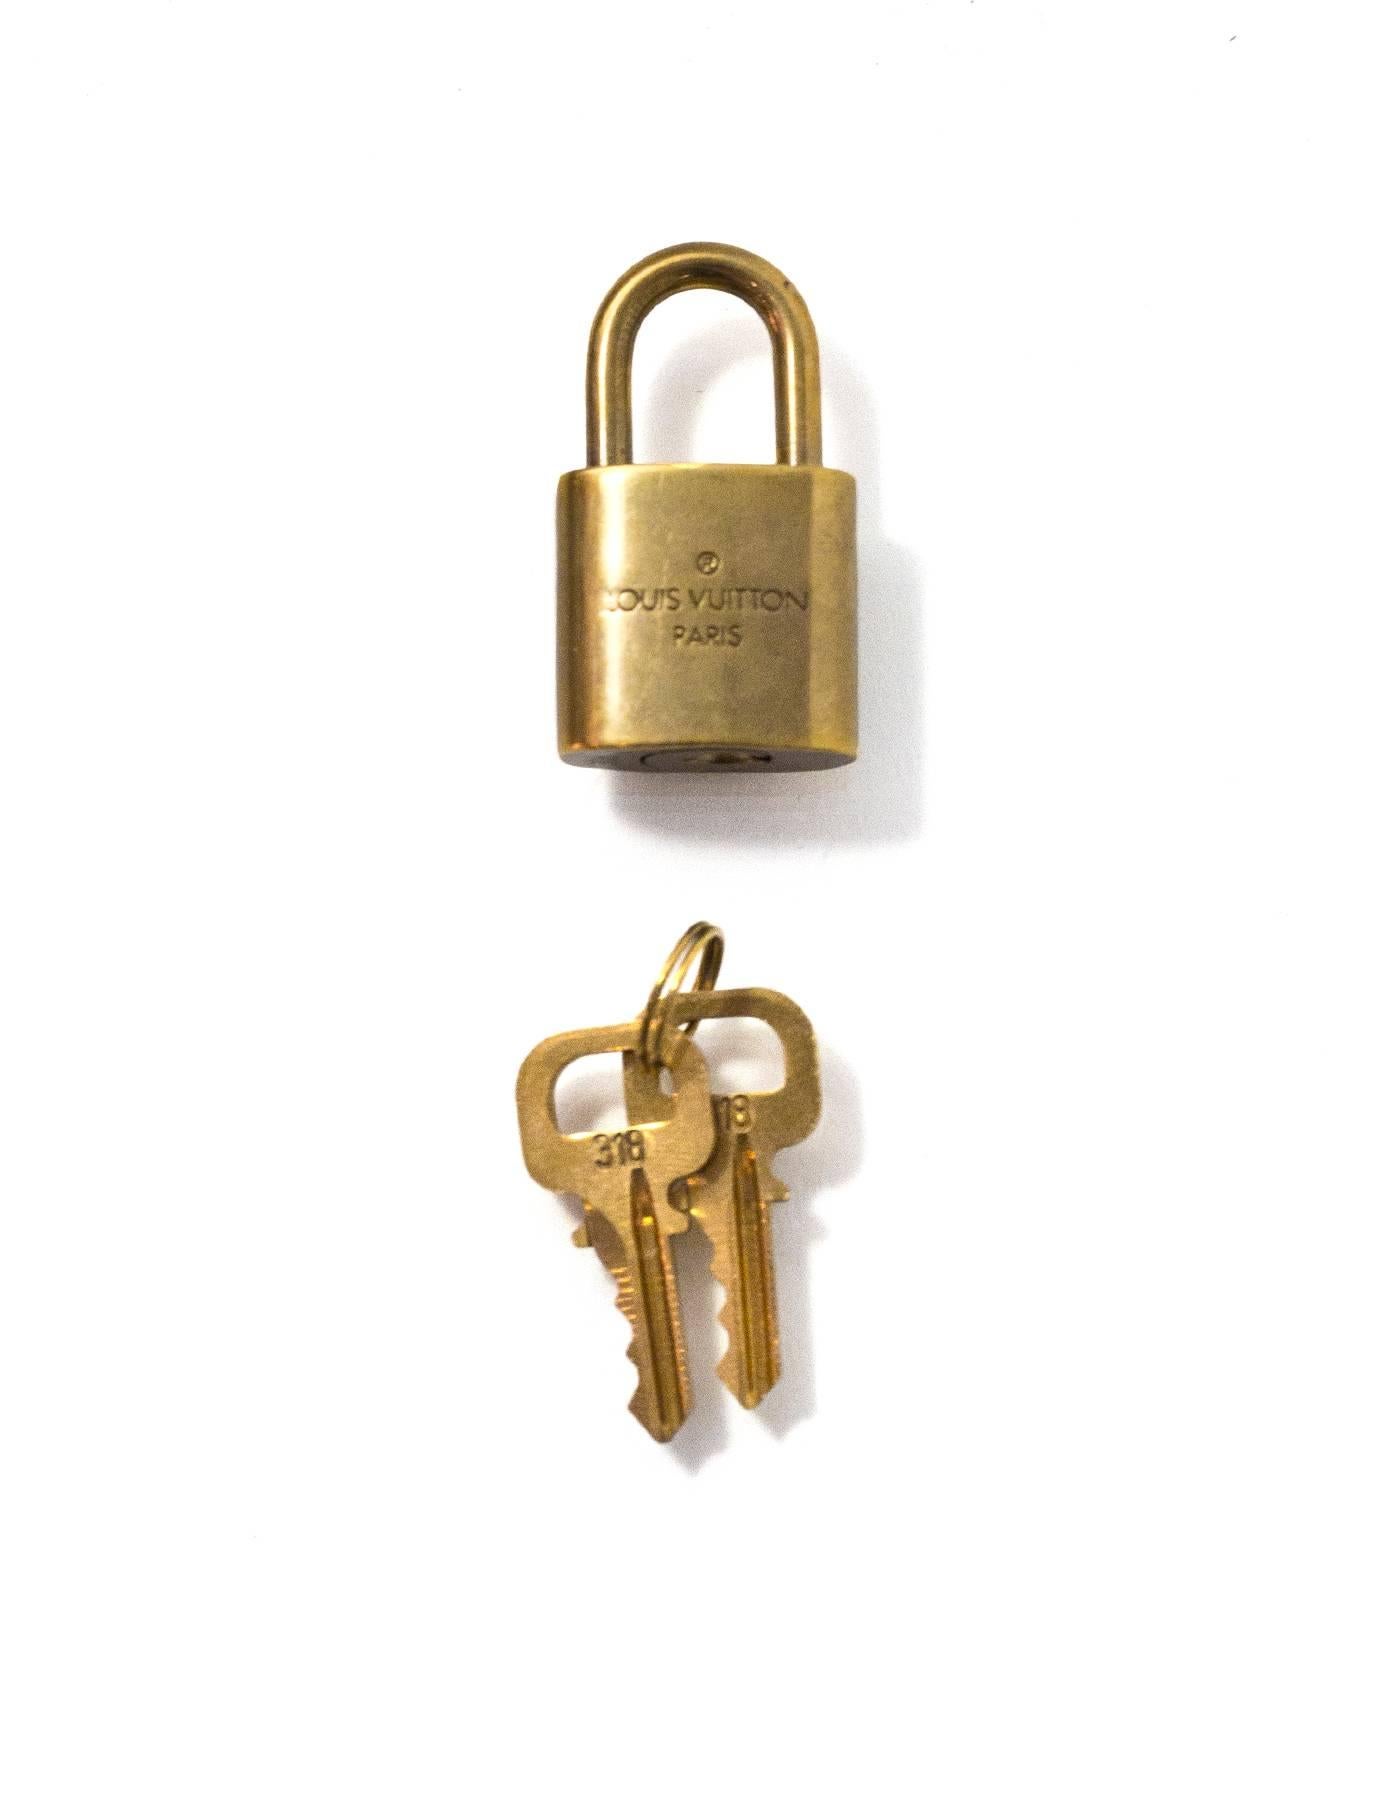 Louis Vuitton Brass Logo Lock & Keys

Color: Gold
Hardware: Brass
Materials: Metal
Stamp: Louis Vuitton 318
Retail Price: $91 + tax
Overall Condition: Very good good pre-owned condition, light tarnish throughout
Includes: Lock, two keys,